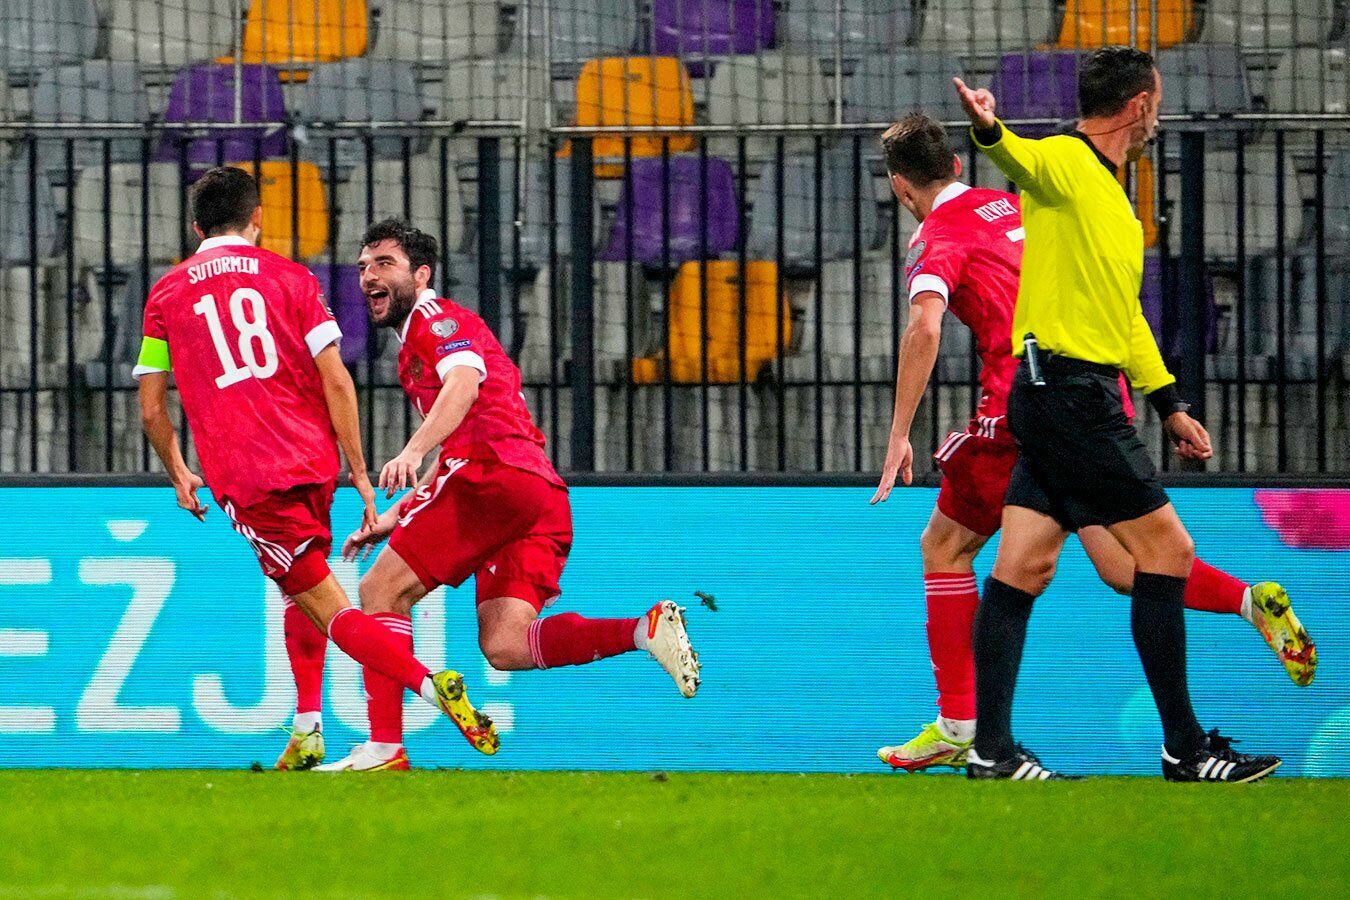 Russian national team beat Slovenes in World Cup 2022 qualifying match